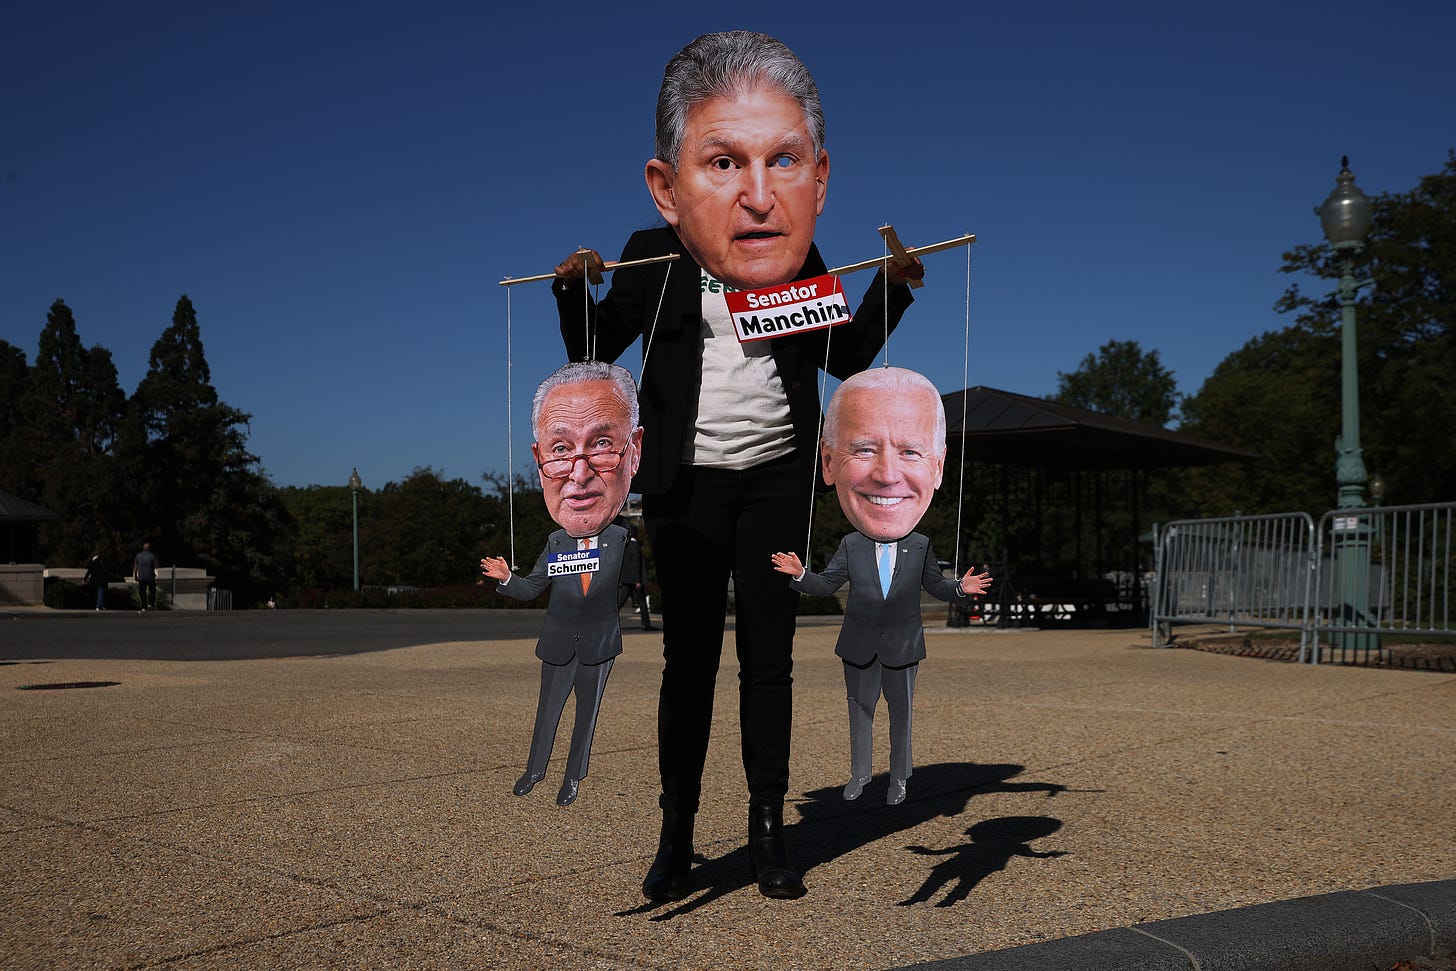 WASHINGTON, DC - OCTOBER 20: A demonstrator wears a photograph of Sen. Joe Manchin (D-WV) as a mask while playing a puppet-master at the periphery of a rally highlighting the efforts of Congressional Democrats to legislate against climate change outside the U.S. Capitol on October 20, 2021 in Washington, DC. Organized by the League of Conservation Voters, the event hosted Democratic members of both the House of Representatives and the Senate. (Photo by Chip Somodevilla/Getty Images)